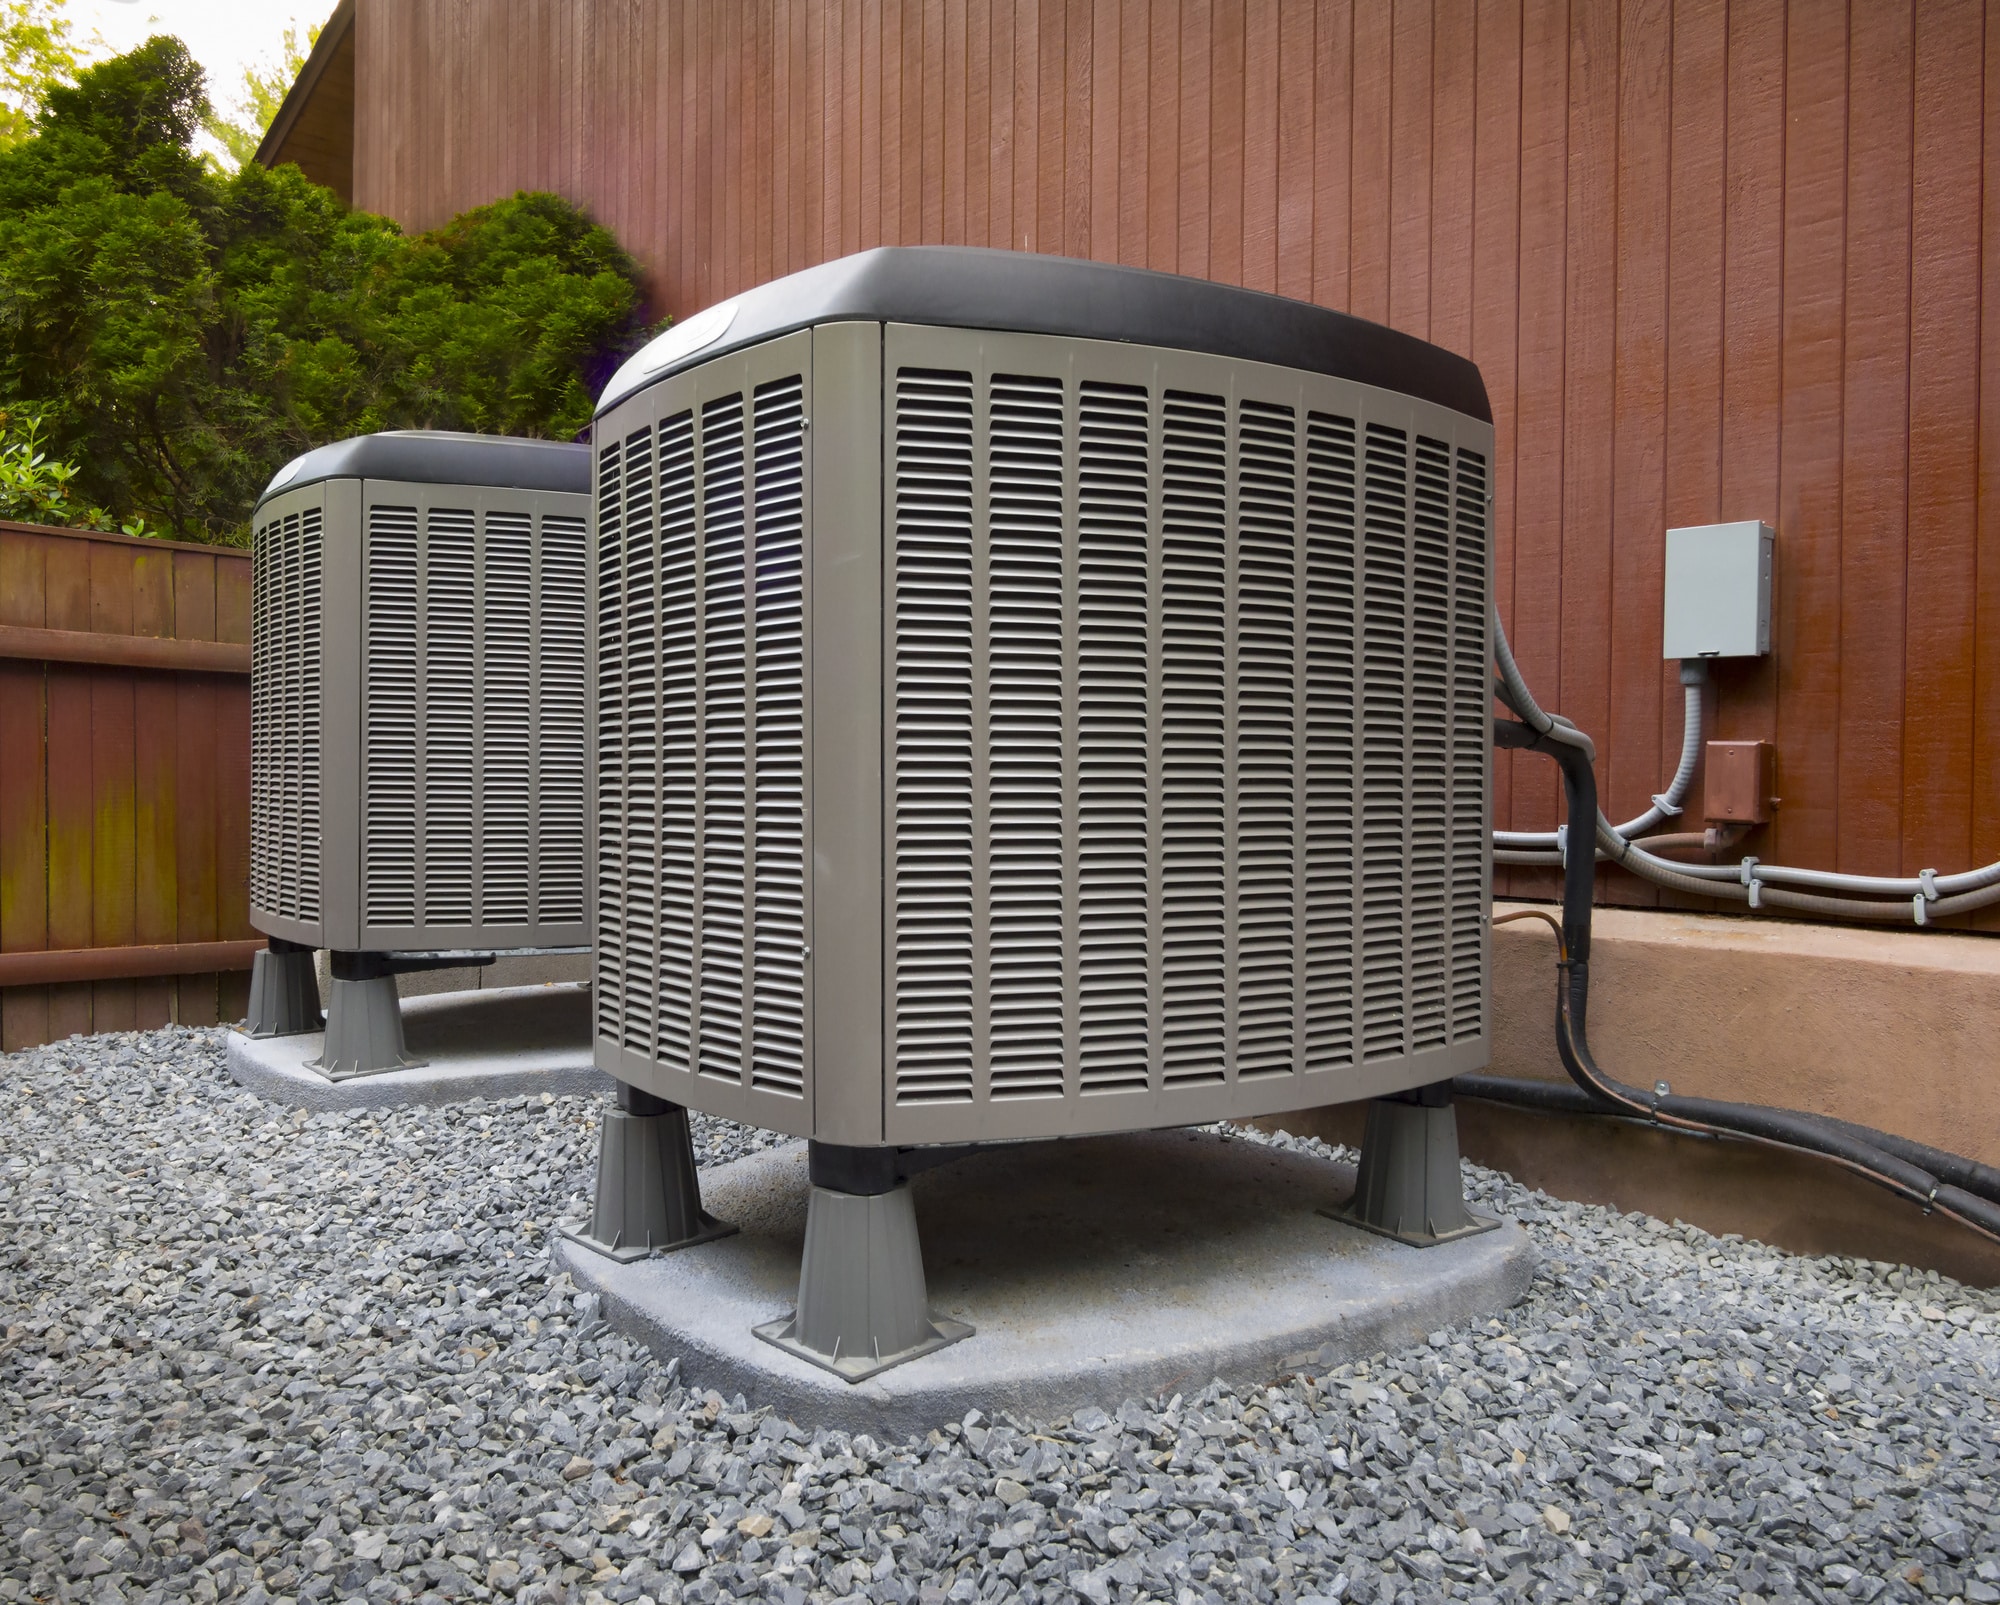 What Should You Include In Your Winter HVAC Maintenance?